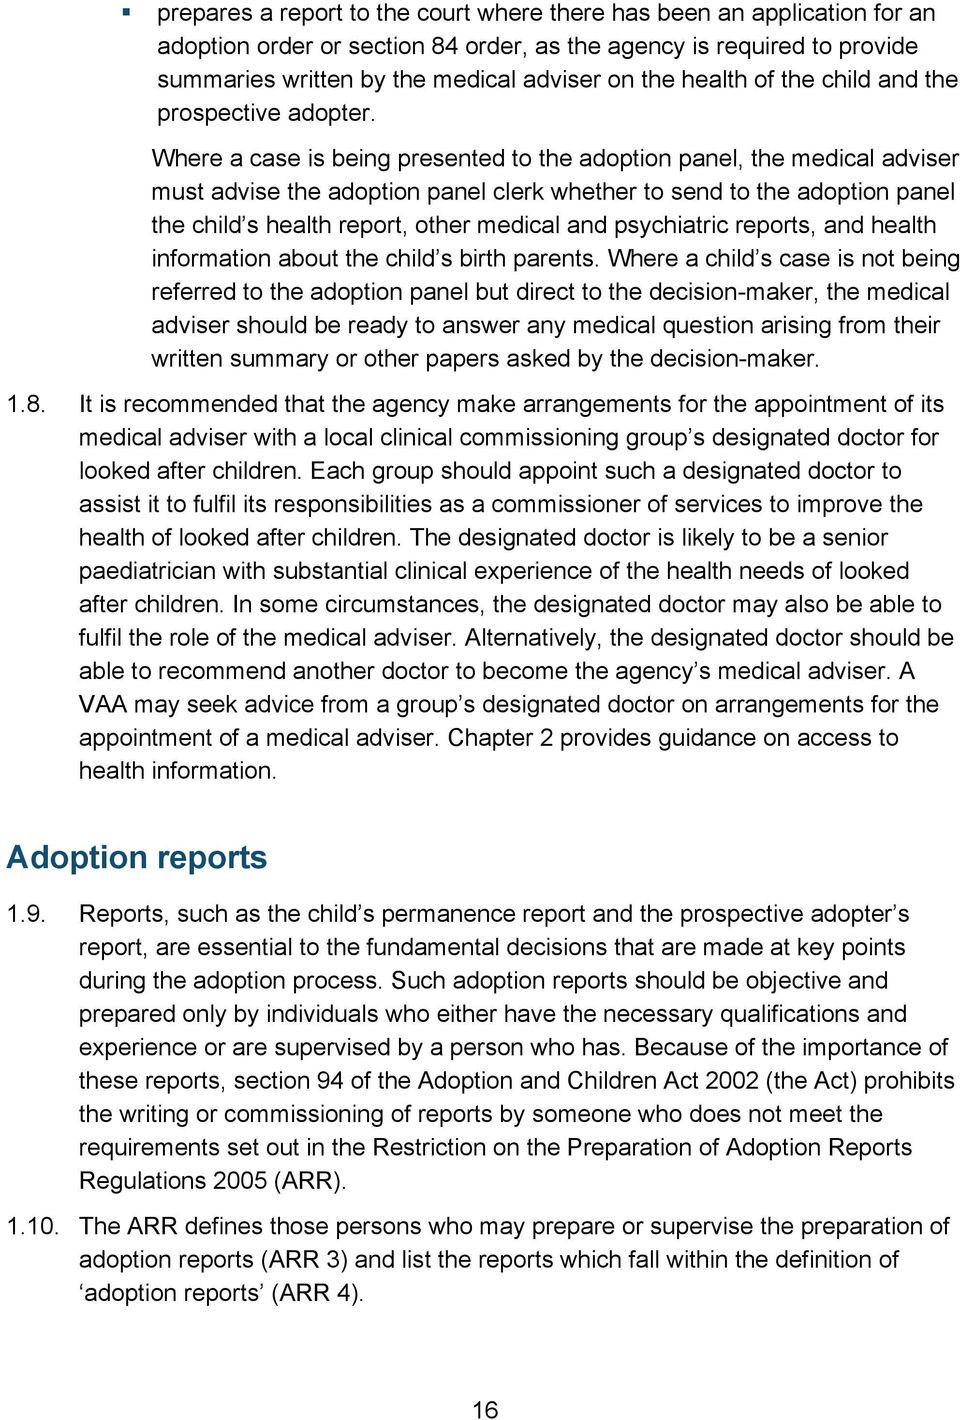 Where a case is being presented to the adoption panel, the medical adviser must advise the adoption panel clerk whether to send to the adoption panel the child s health report, other medical and